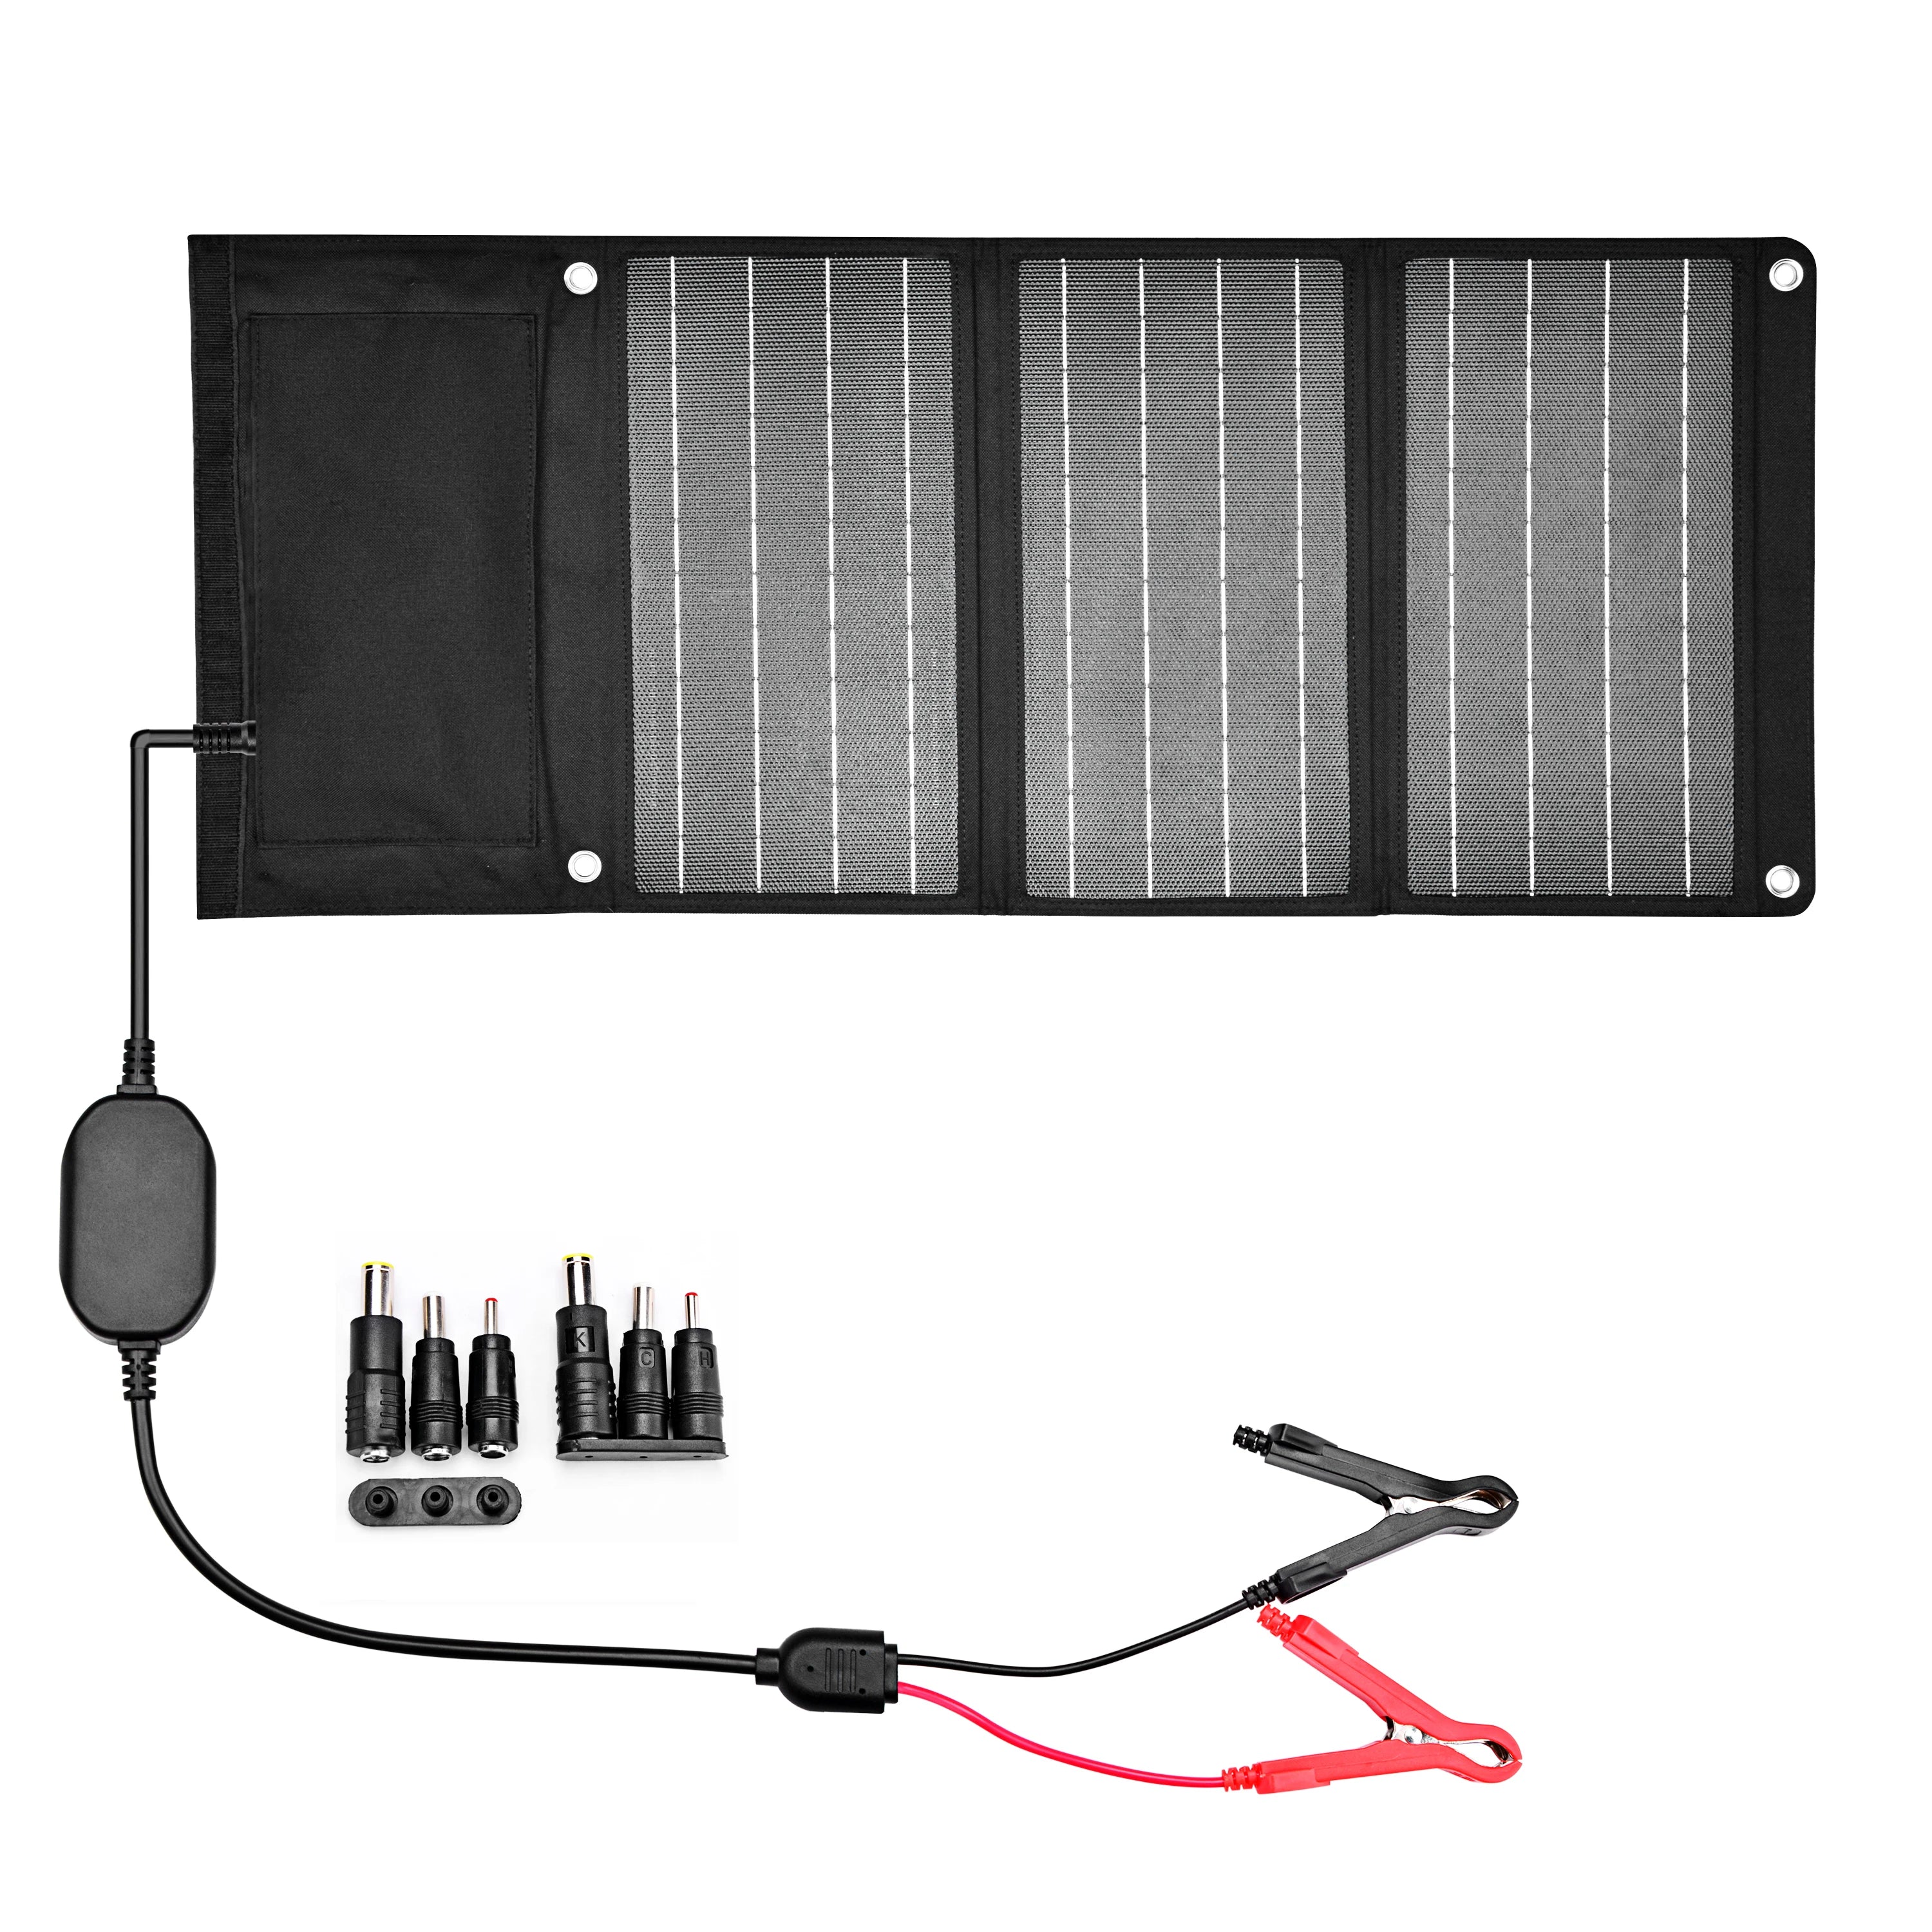 30W Portable Solar Panel, Exceptional after-sales service with dedicated support team for hassle-free experience.